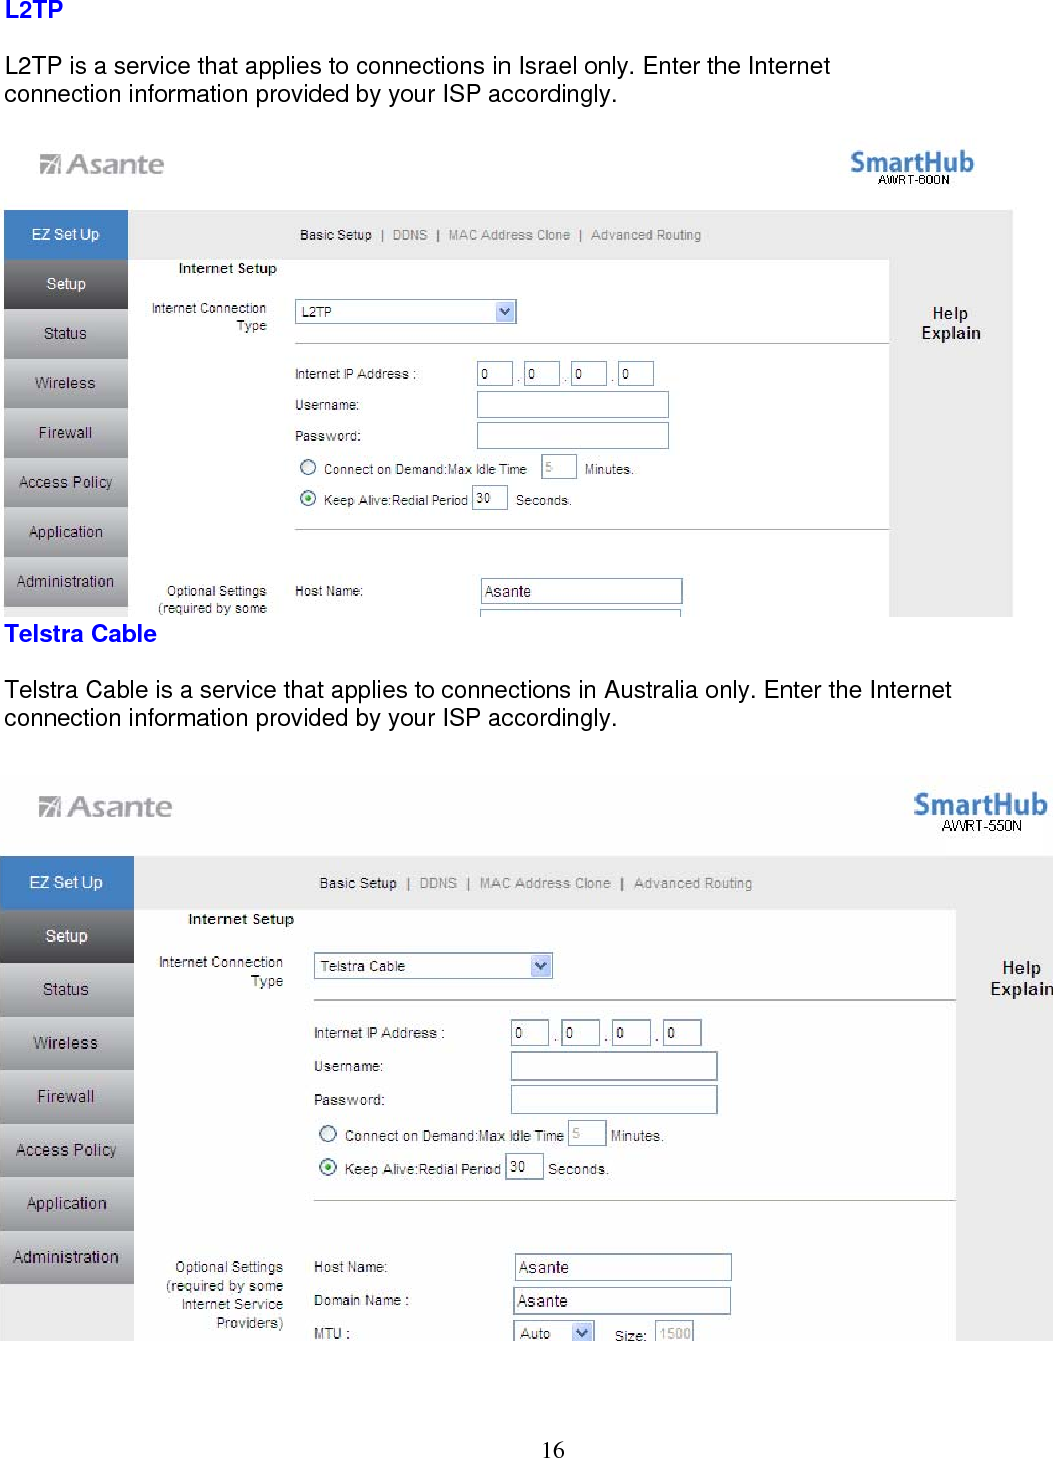  16L2TP  L2TP is a service that applies to connections in Israel only. Enter the Internet connection information provided by your ISP accordingly.  Telstra Cable  Telstra Cable is a service that applies to connections in Australia only. Enter the Internet connection information provided by your ISP accordingly.  